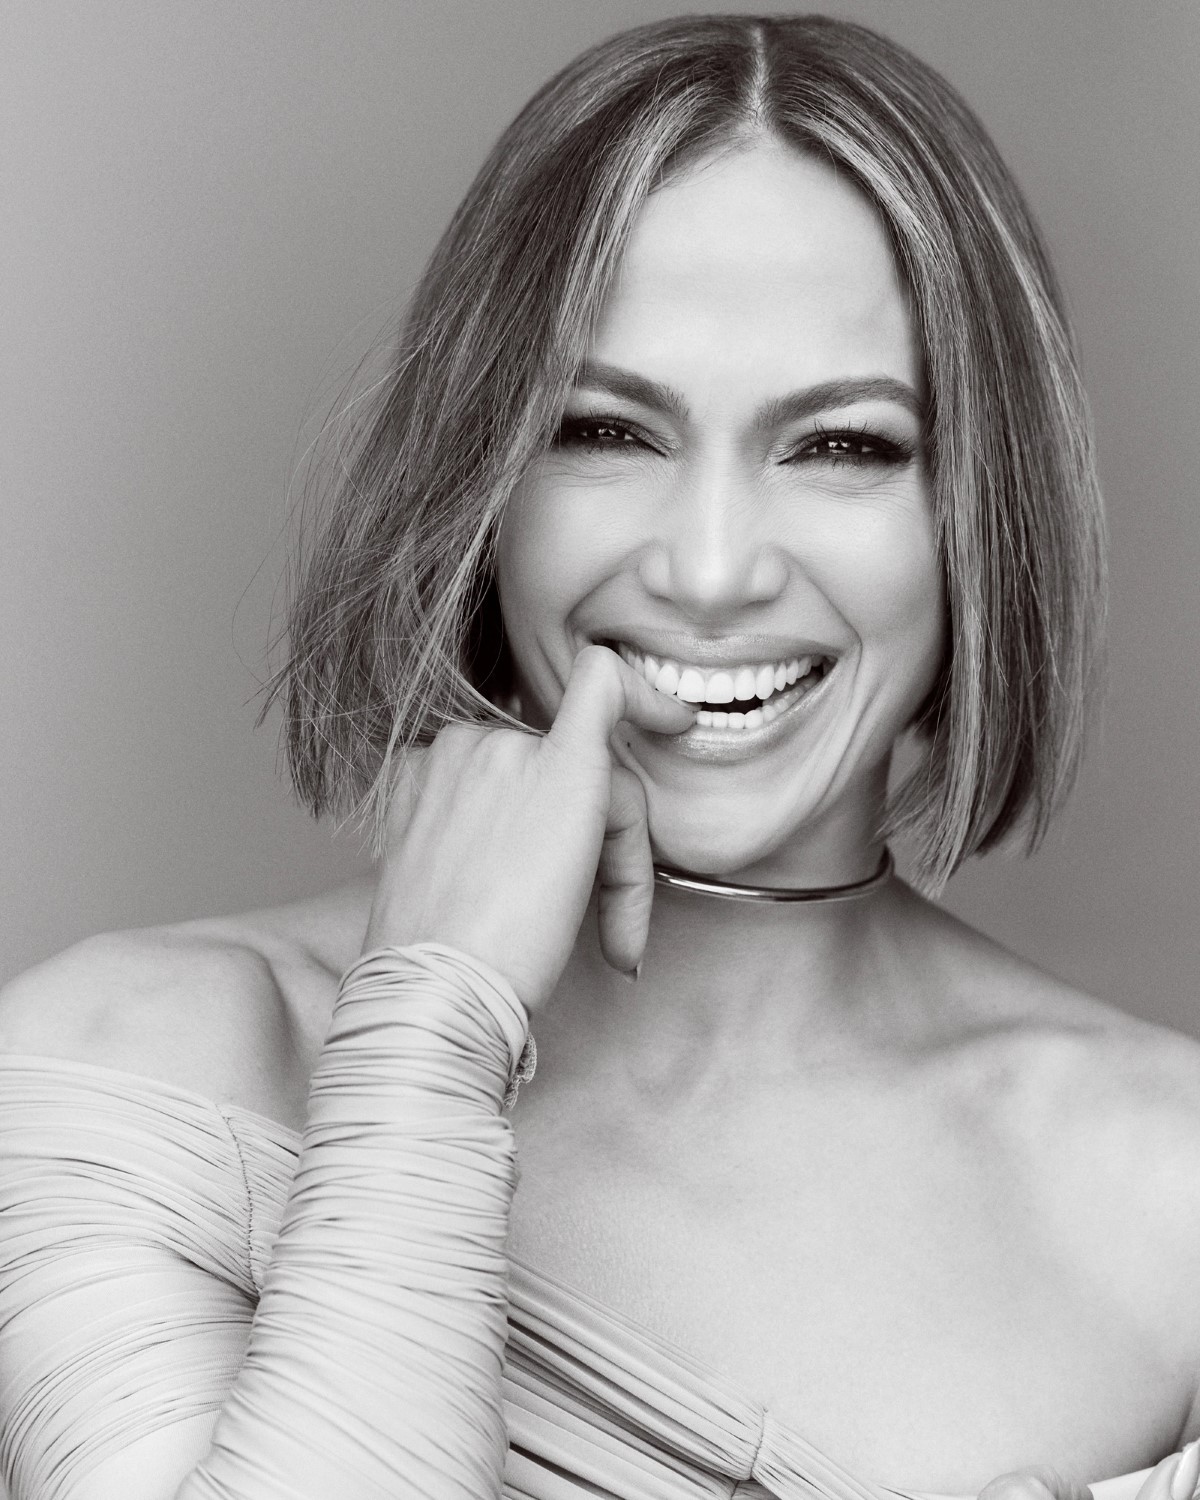 Jennifer Lopez covers Rolling Stone March 2022 by Chrisean Rose